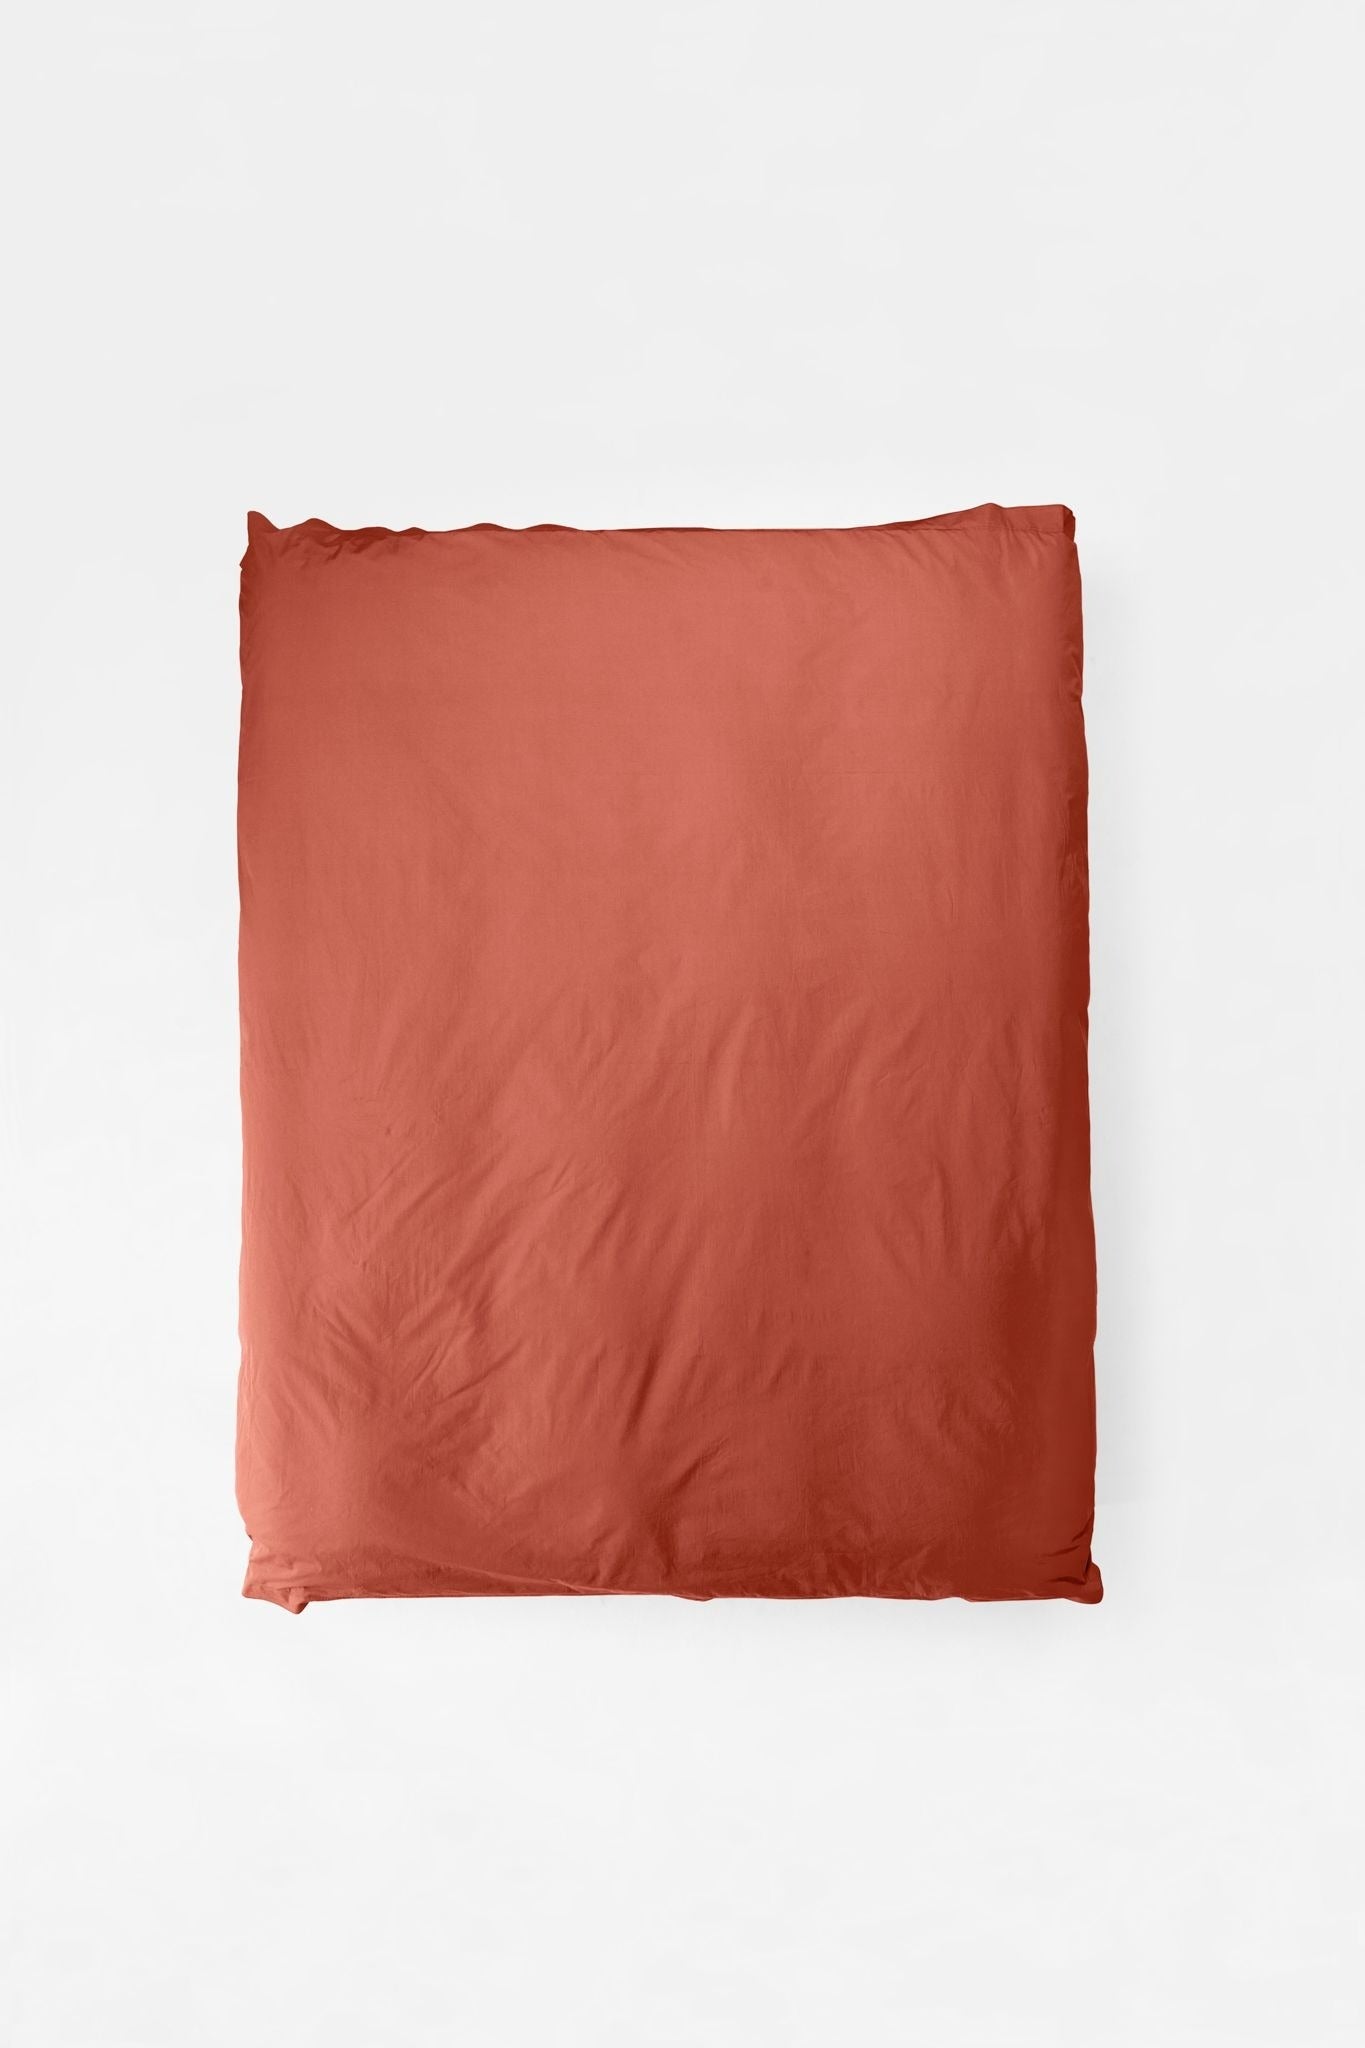 Mono Organic Cotton Percale Duvet Cover - Ochre Red Duvet Covers in Super King